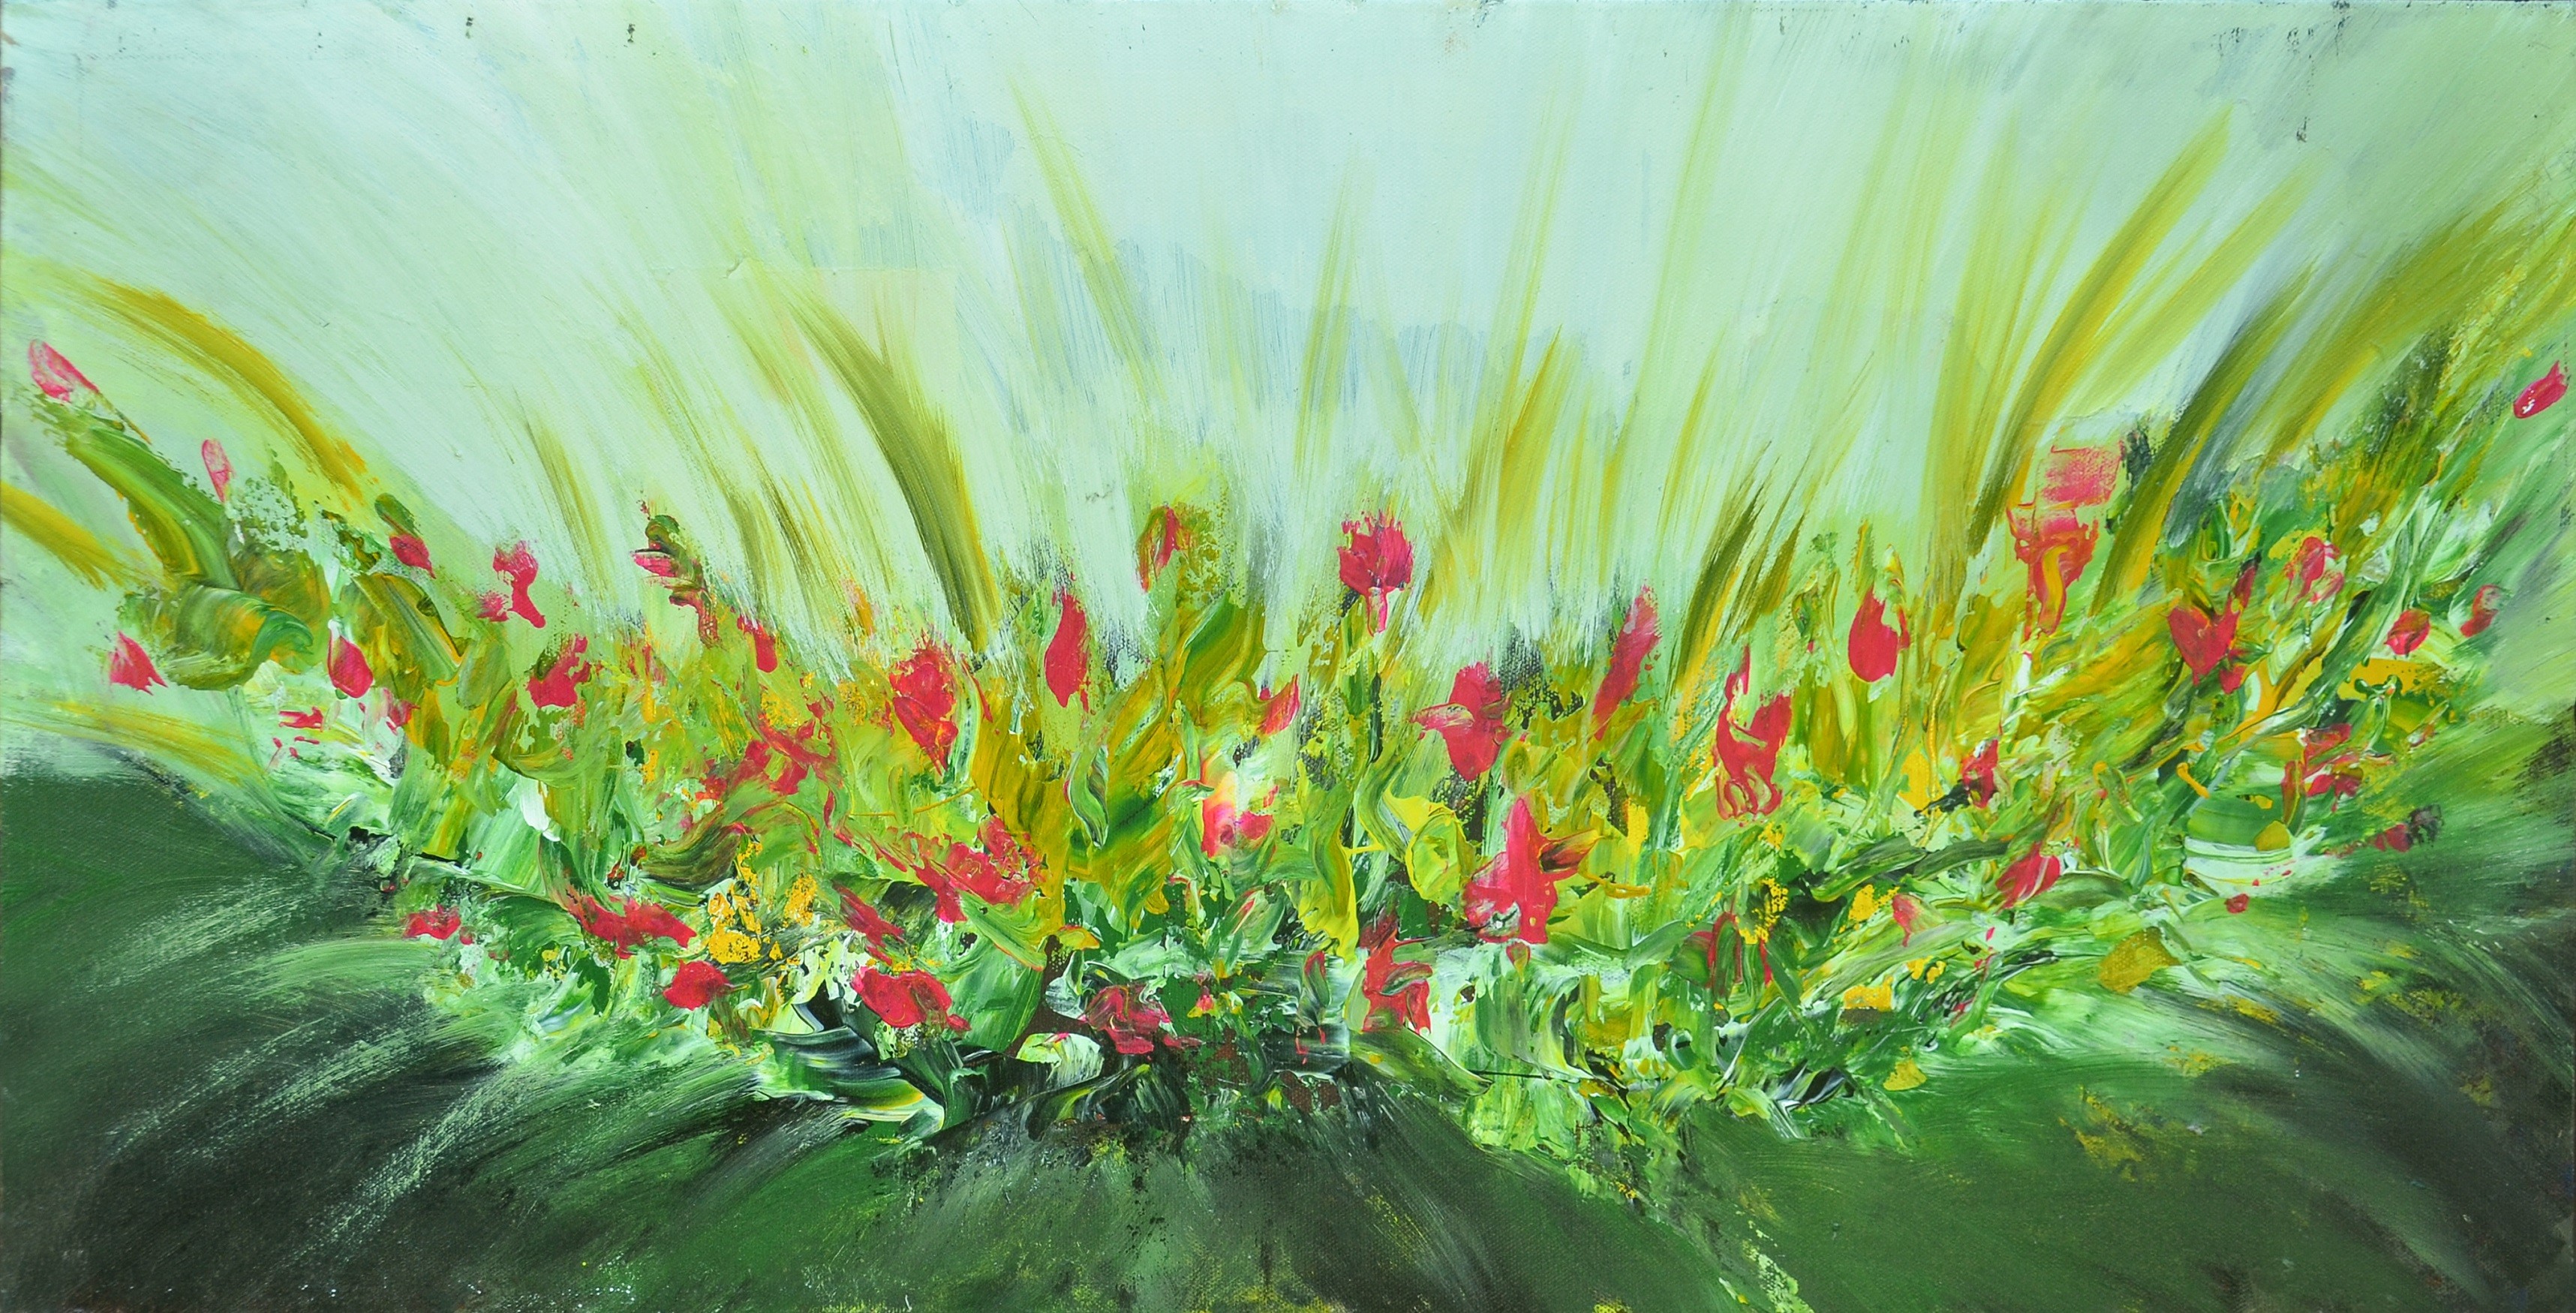 Grass with Flowes by Susantha Galgodage